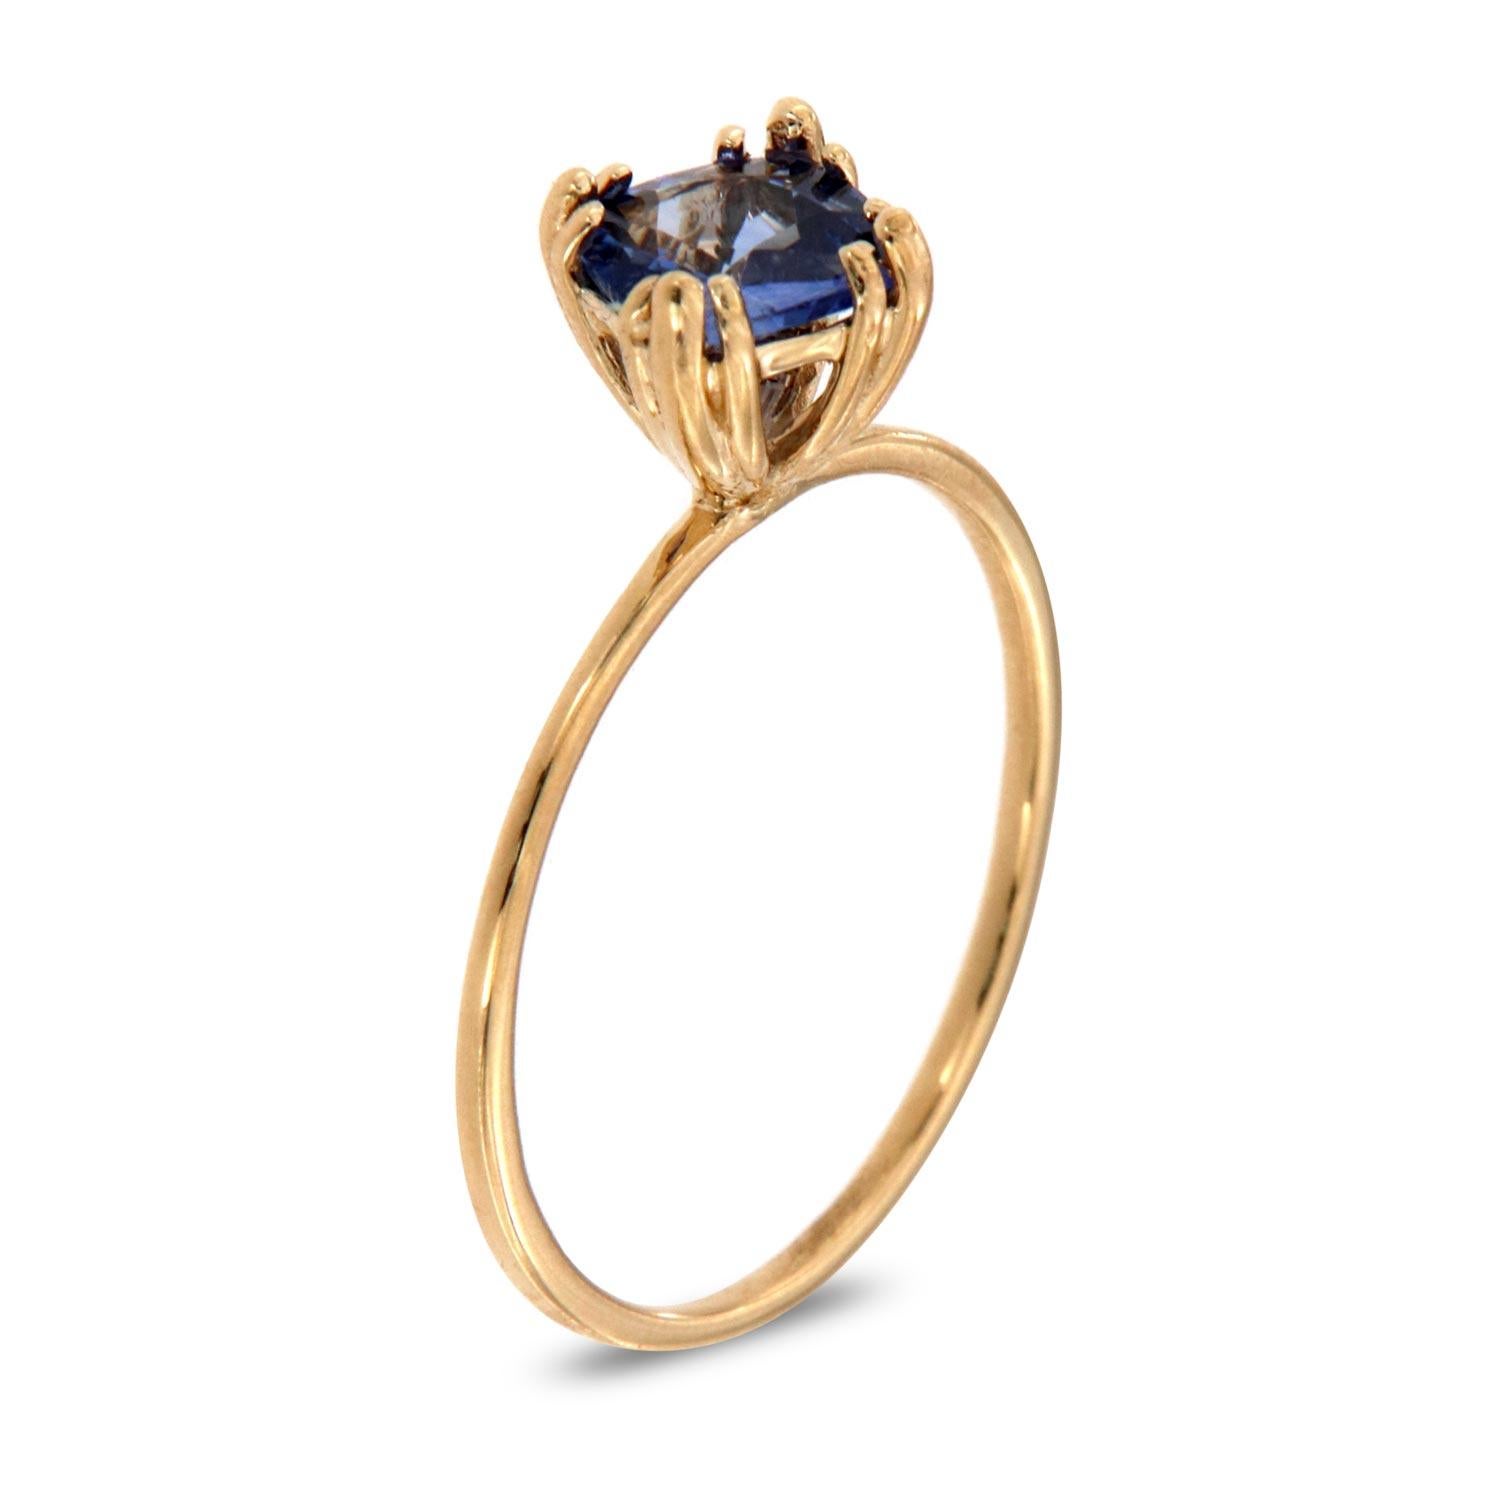 This petite rustic style ring is impressive in its Organic appeal, featuring a natural blue asscher sapphire set in a delicate 12 prongs basket. Experience the difference in person!

Product details: 

Center Gemstone Type: SAPPHIRE
Center Gemstone